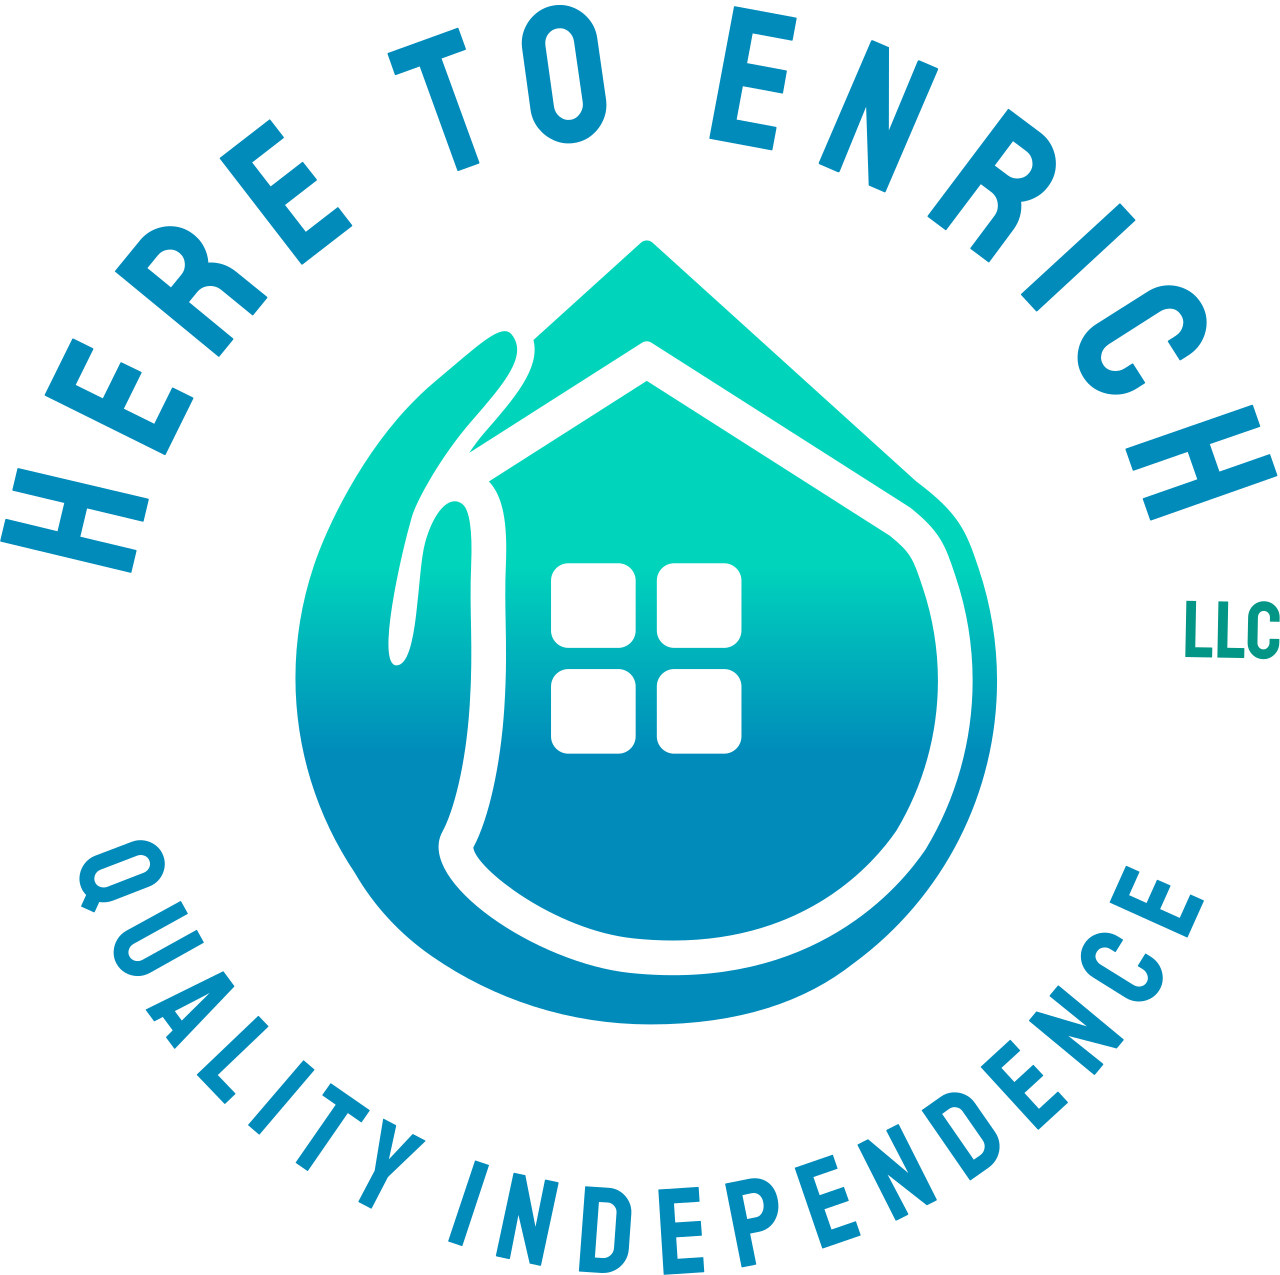 HERE TO ENRICH 's logo